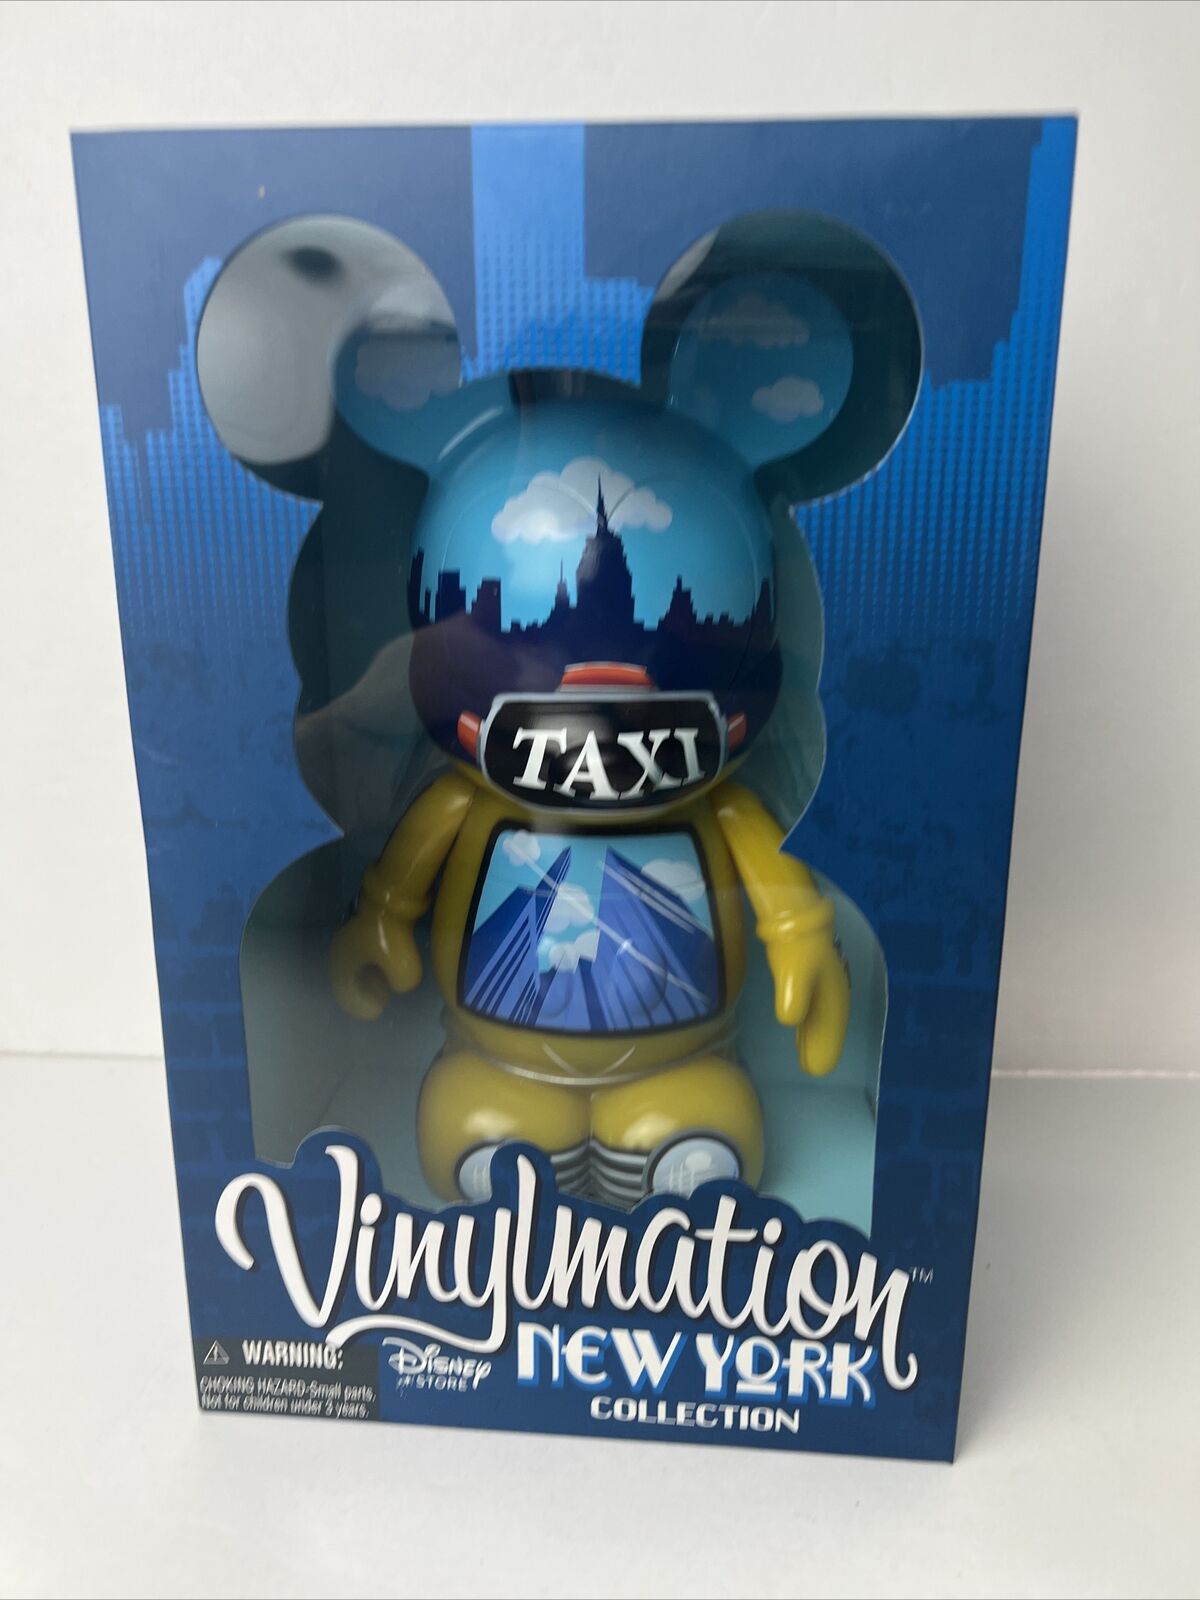 Disney Vinylmation New York Colllection Hey Taxi 9” Limited Edition